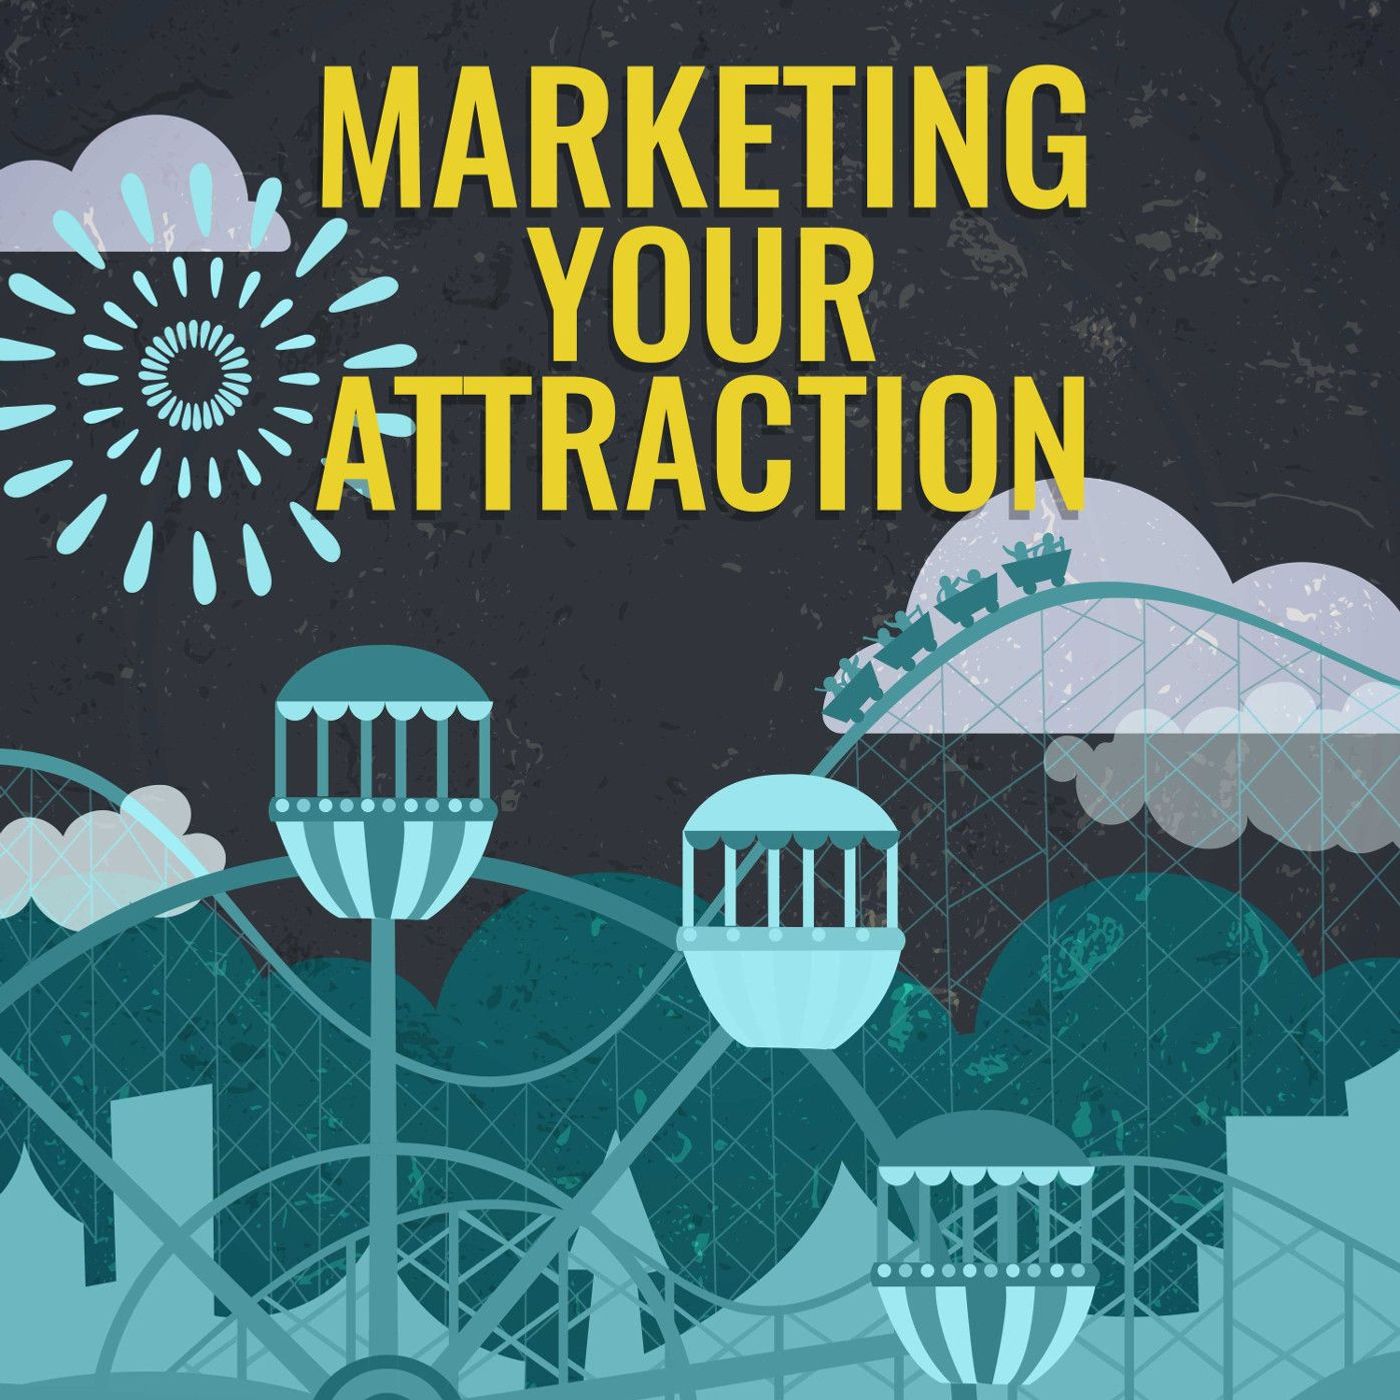 Digital vs. Traditional Marketing for big and small attractions